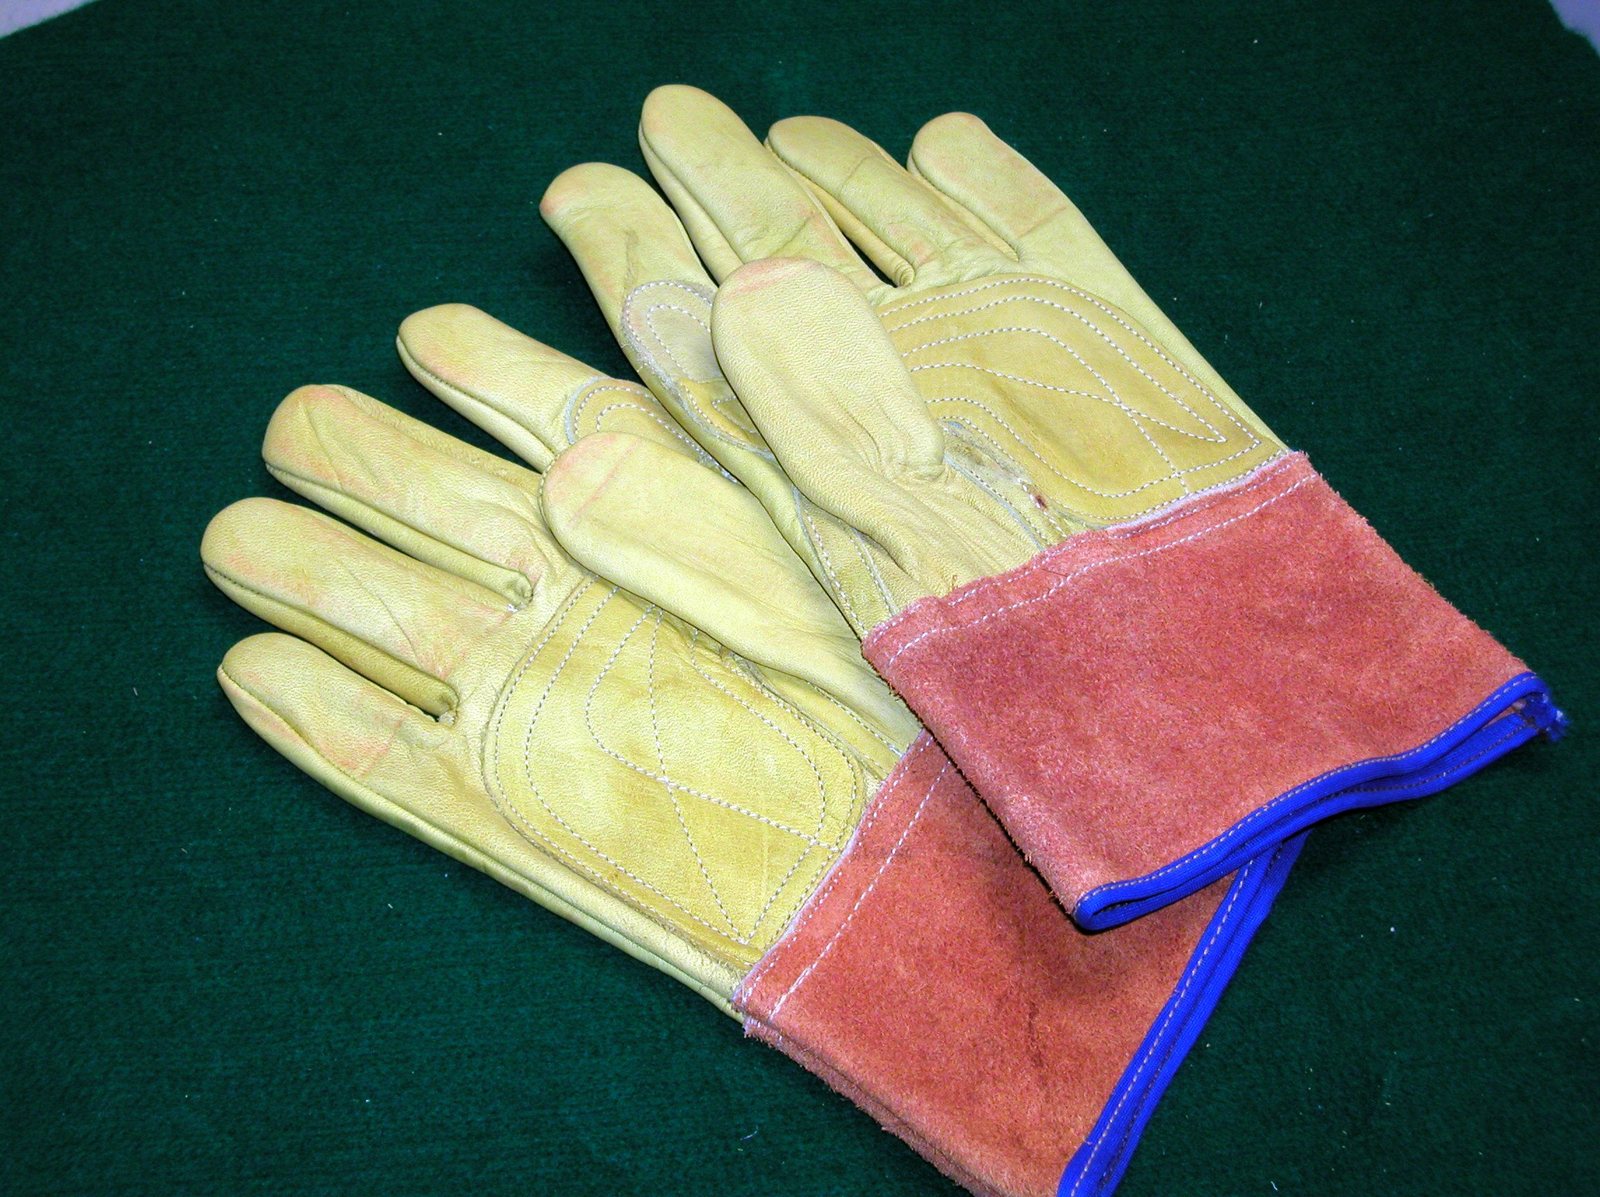 a pair of yellow and orange leather gloves laying on top of a green table